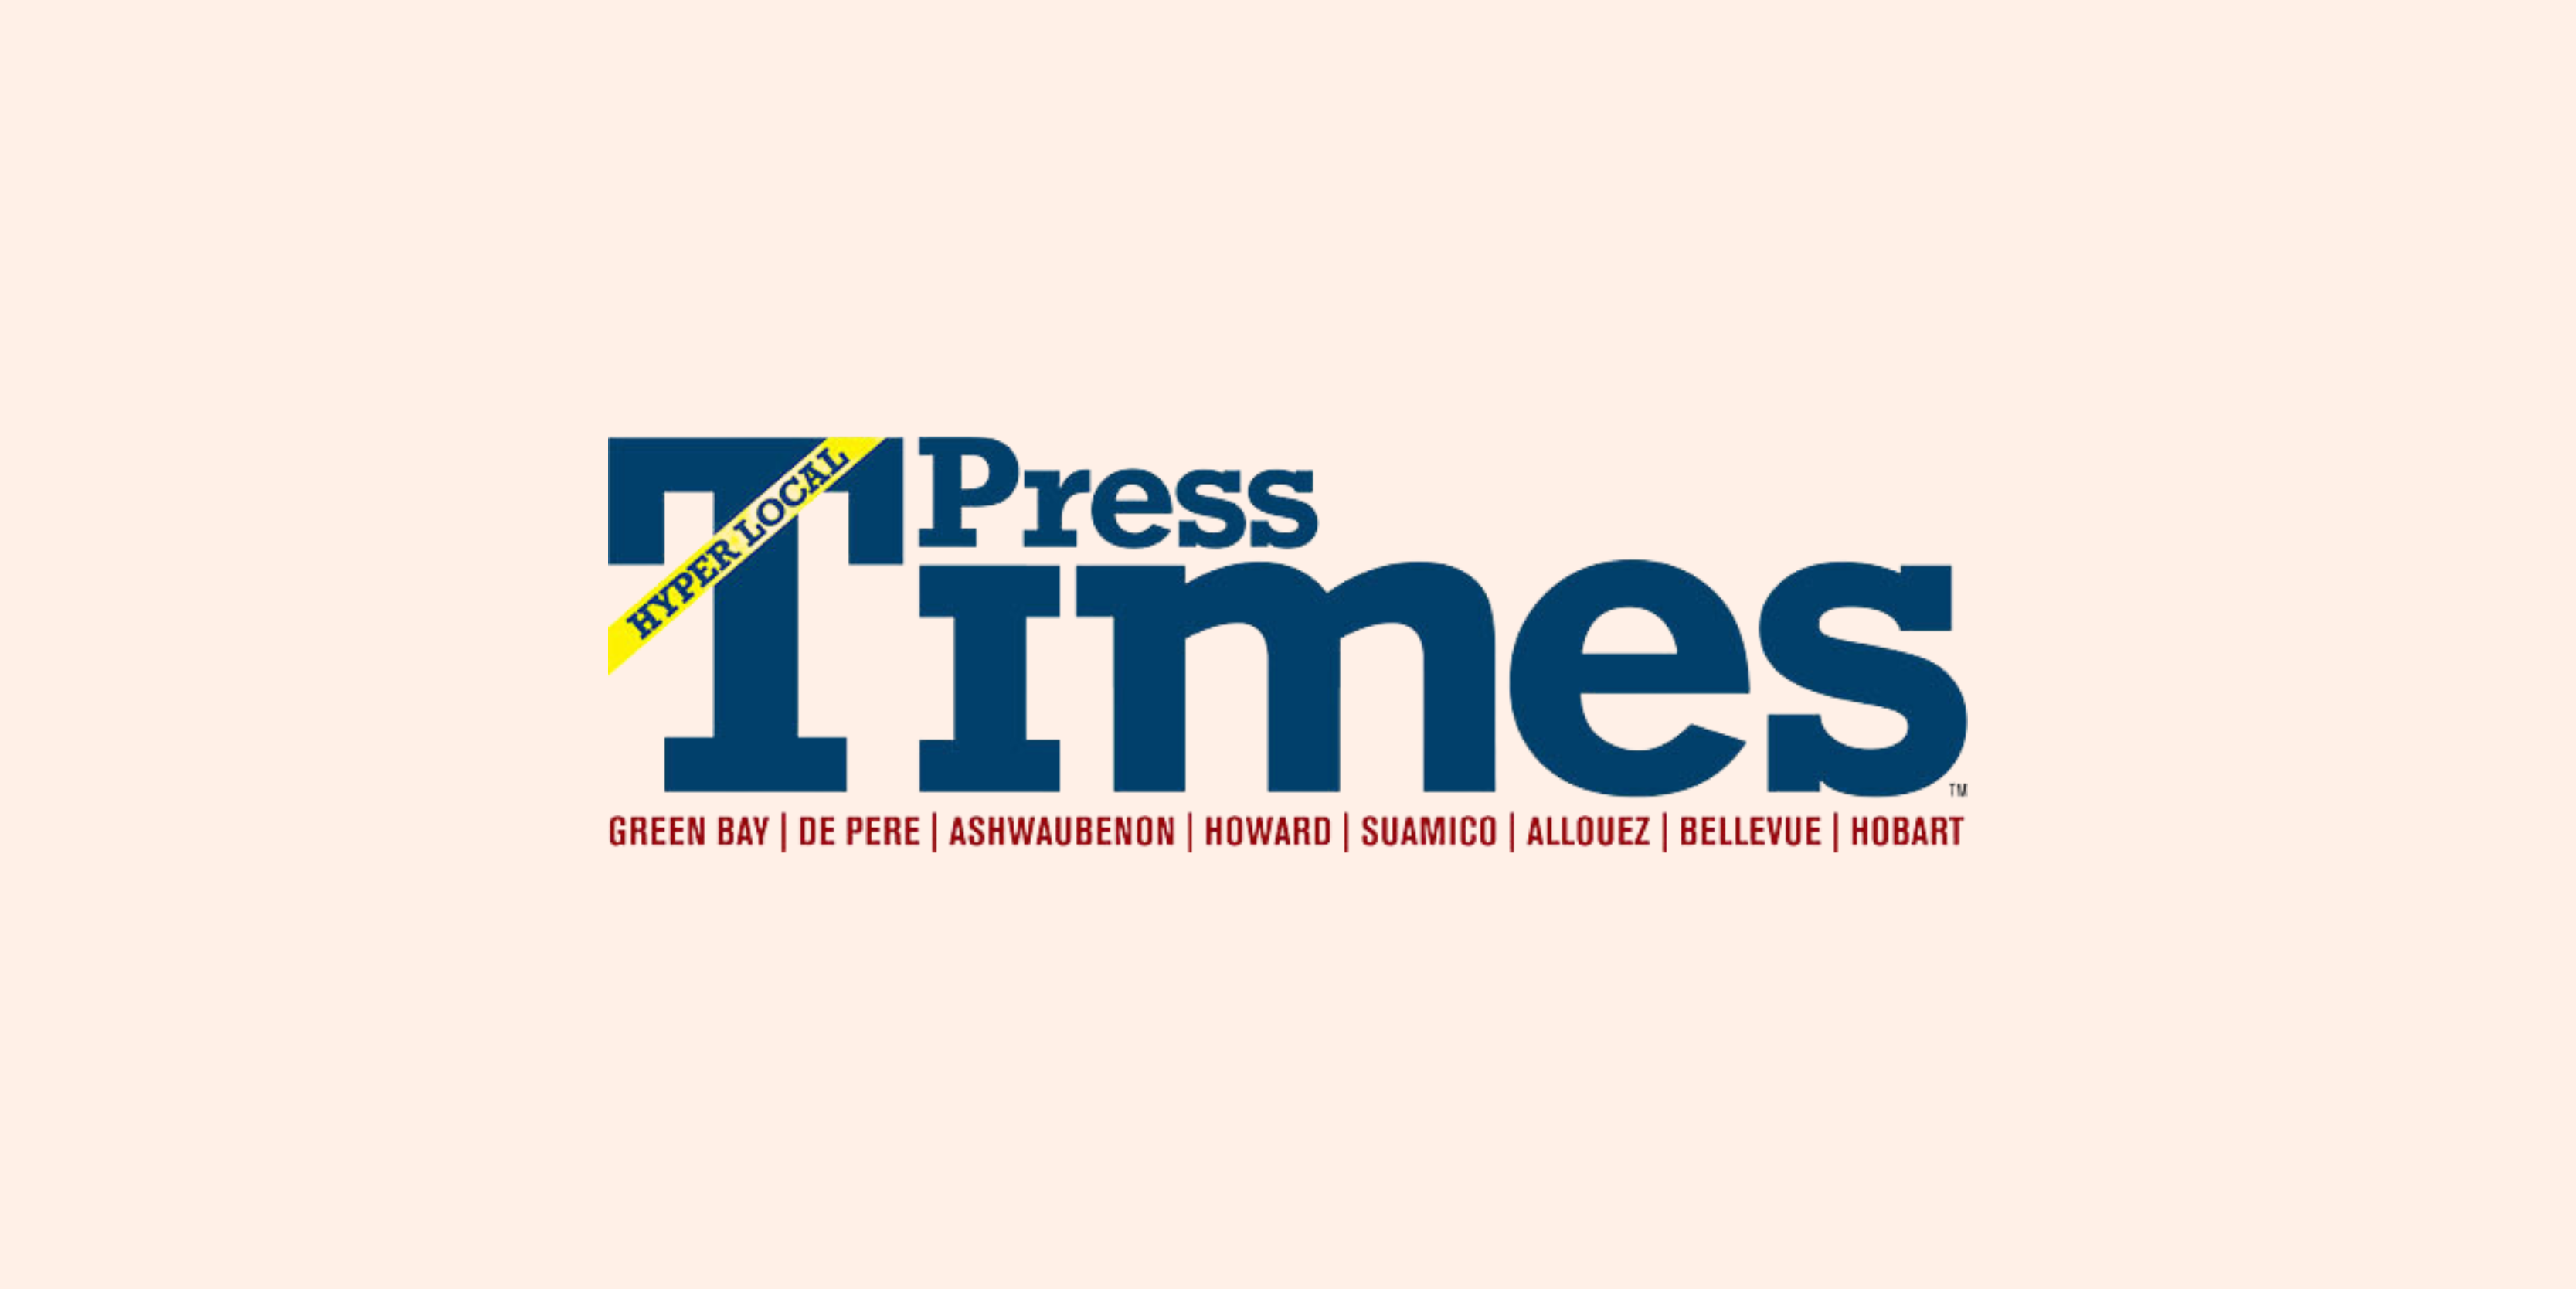 The Press Times